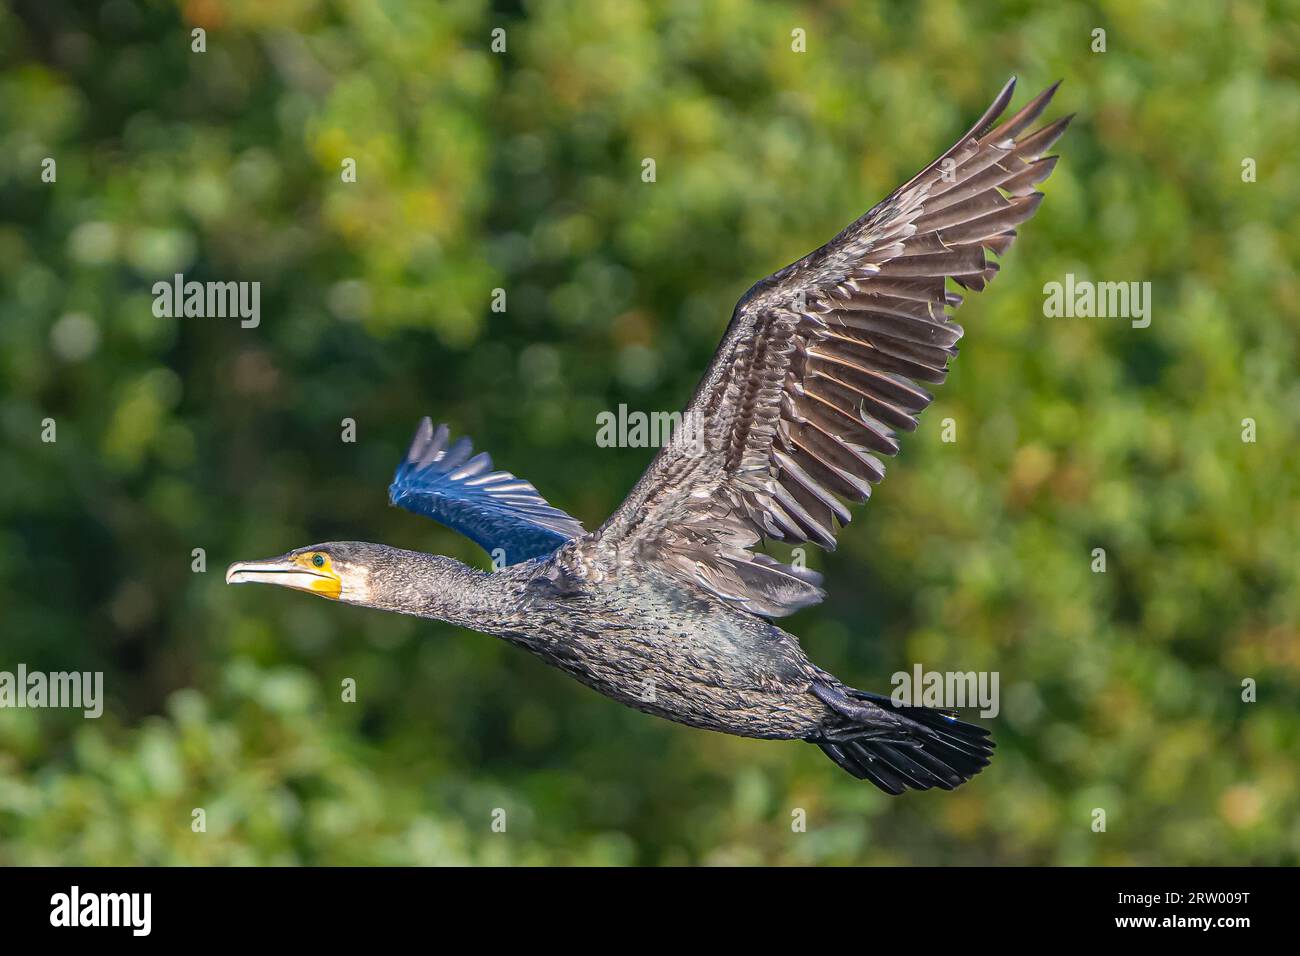 Cormorant flyinf over Richmond Park with tree in Background Stock Photo